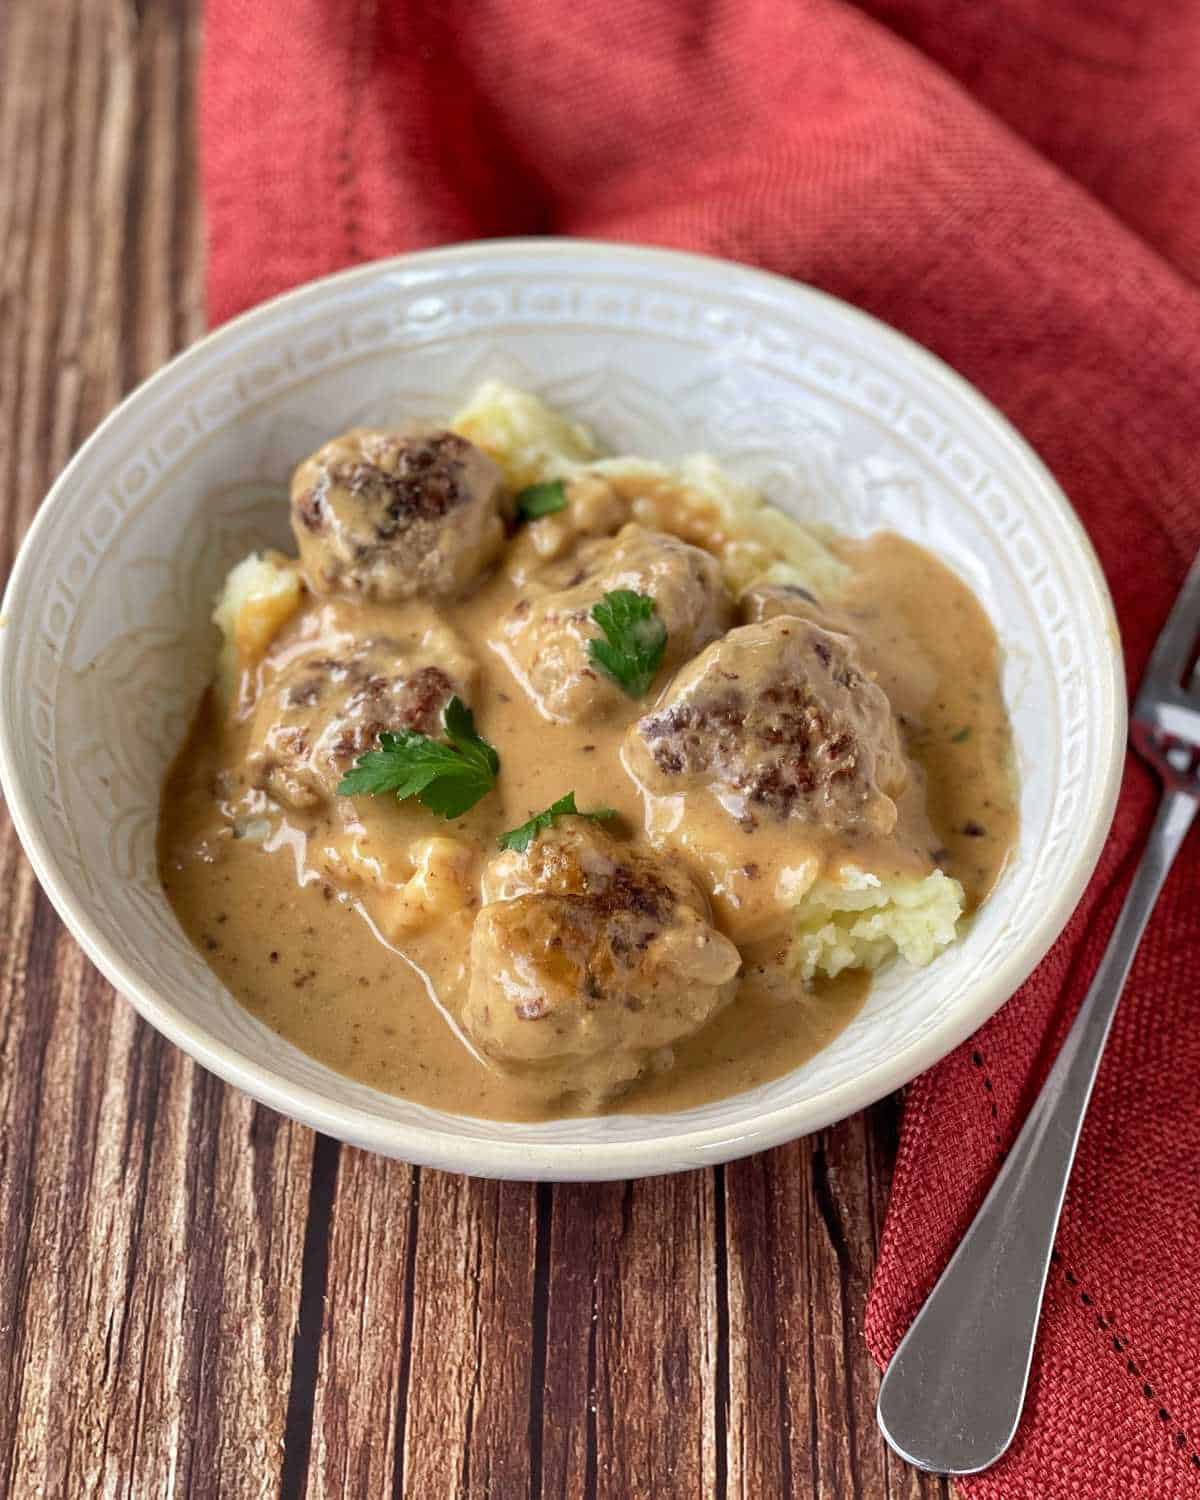 Swedish Meatballs served on mashed potatoes in a white bowl on a wooden table.